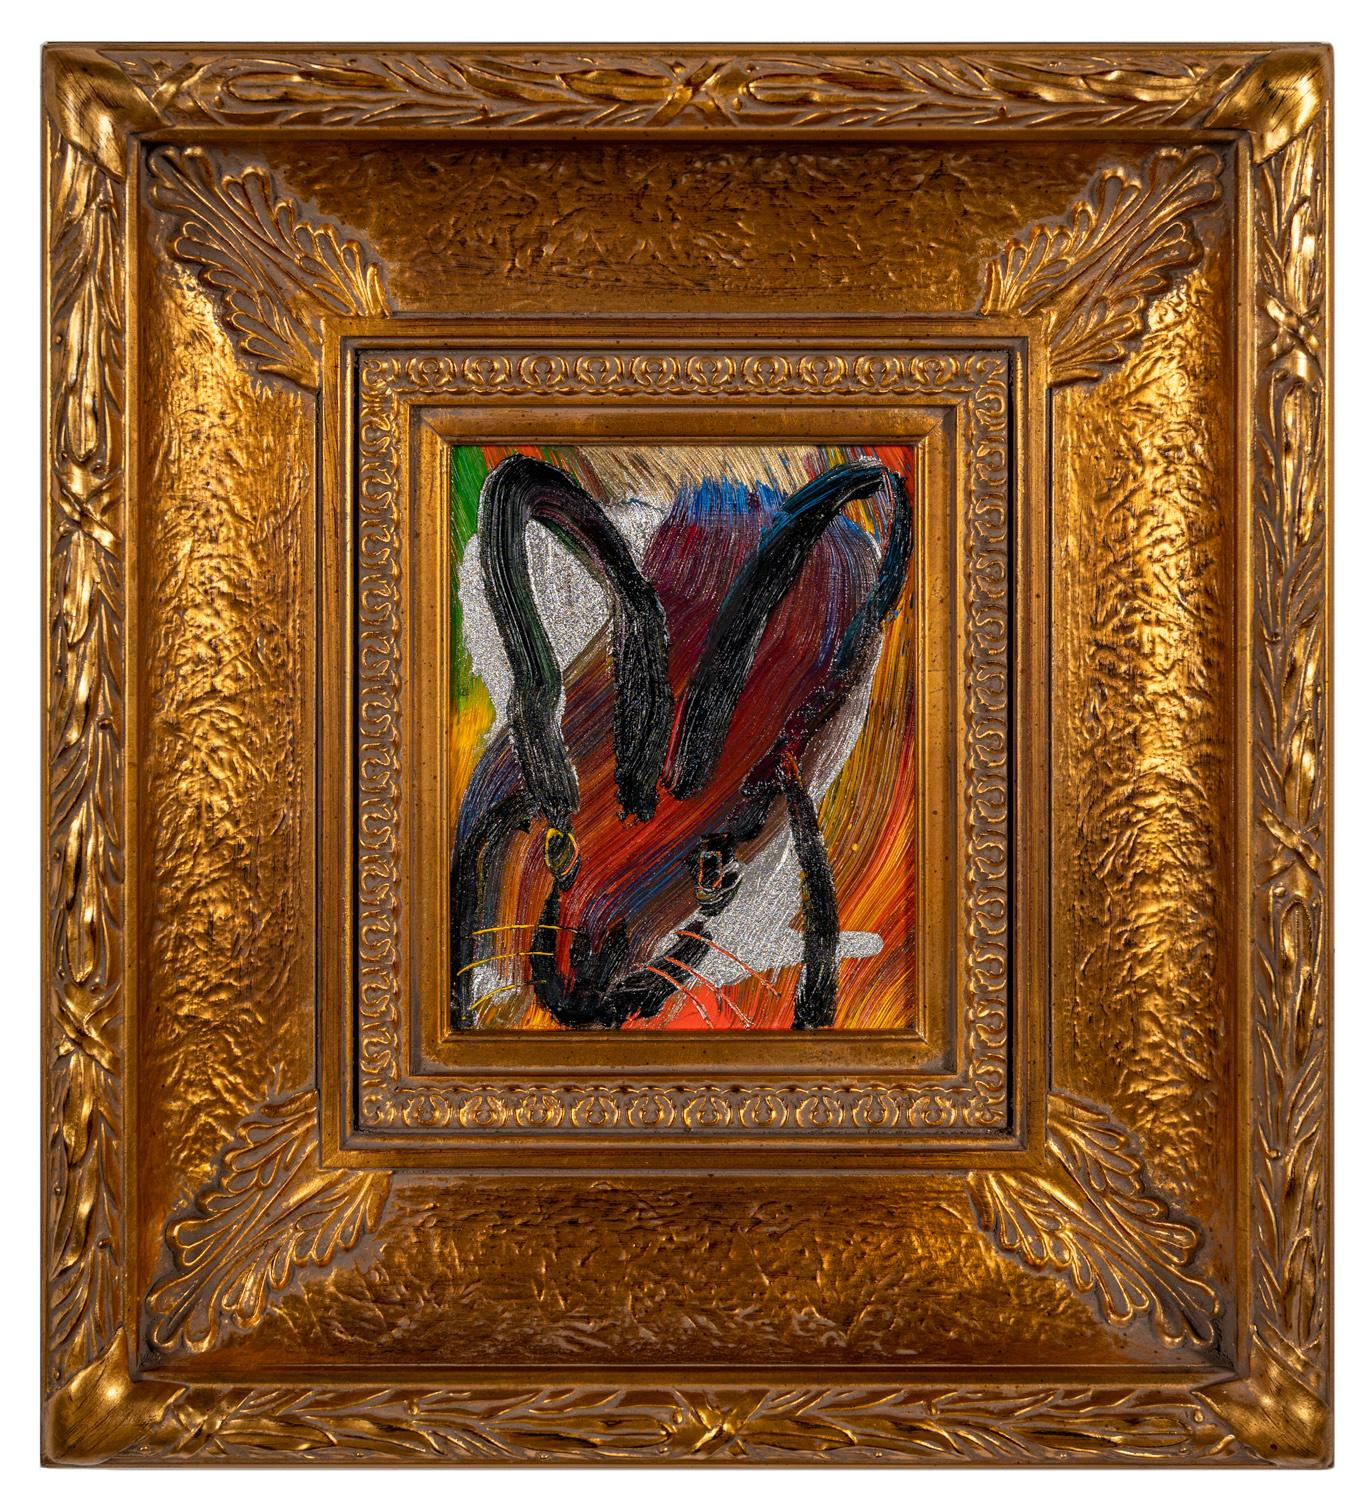 Hunt Slonem "Toem" Bunny on Multicolored Metallic
Single gestured black bunny on a multicolored rainbow background with mixed metallics. Framed in an antique wooden gold frame.

Unframed: 10 x 8 inches
Framed: 23 x 21 inches
*Painting is framed -